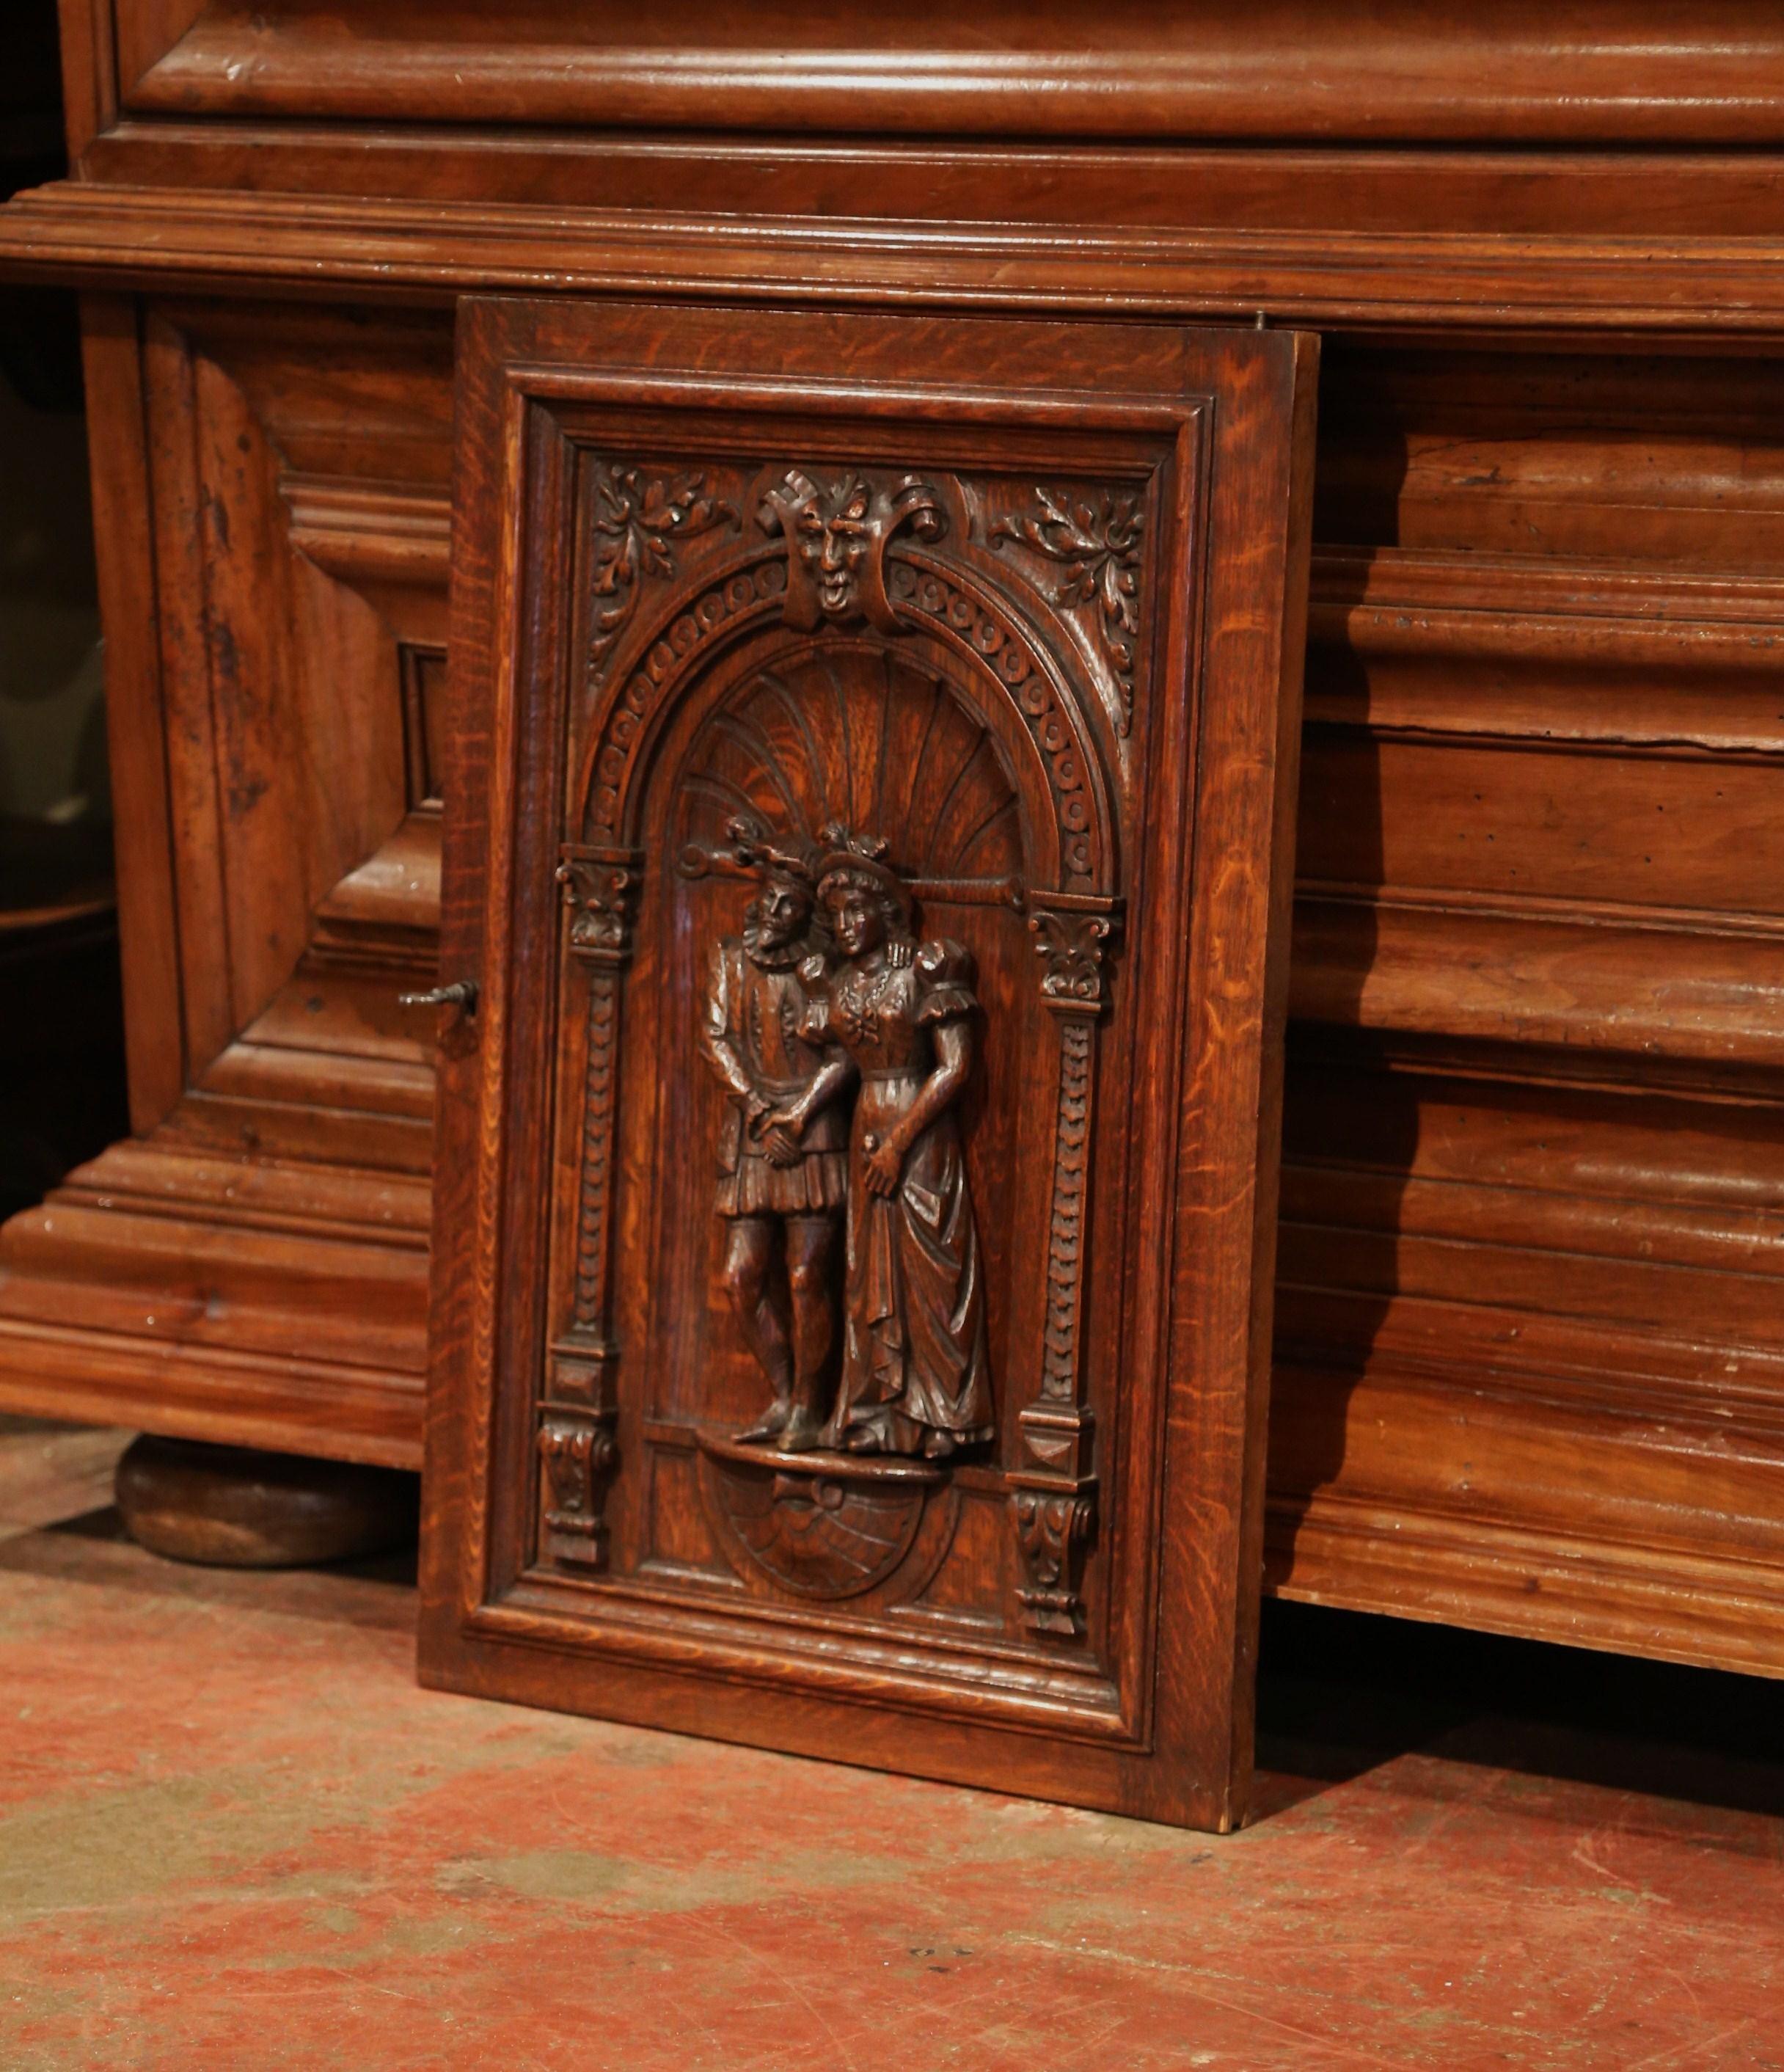 Napoleon III 19th Century French Henri II Carved Oak Cabinet Door with High Relief Carvings